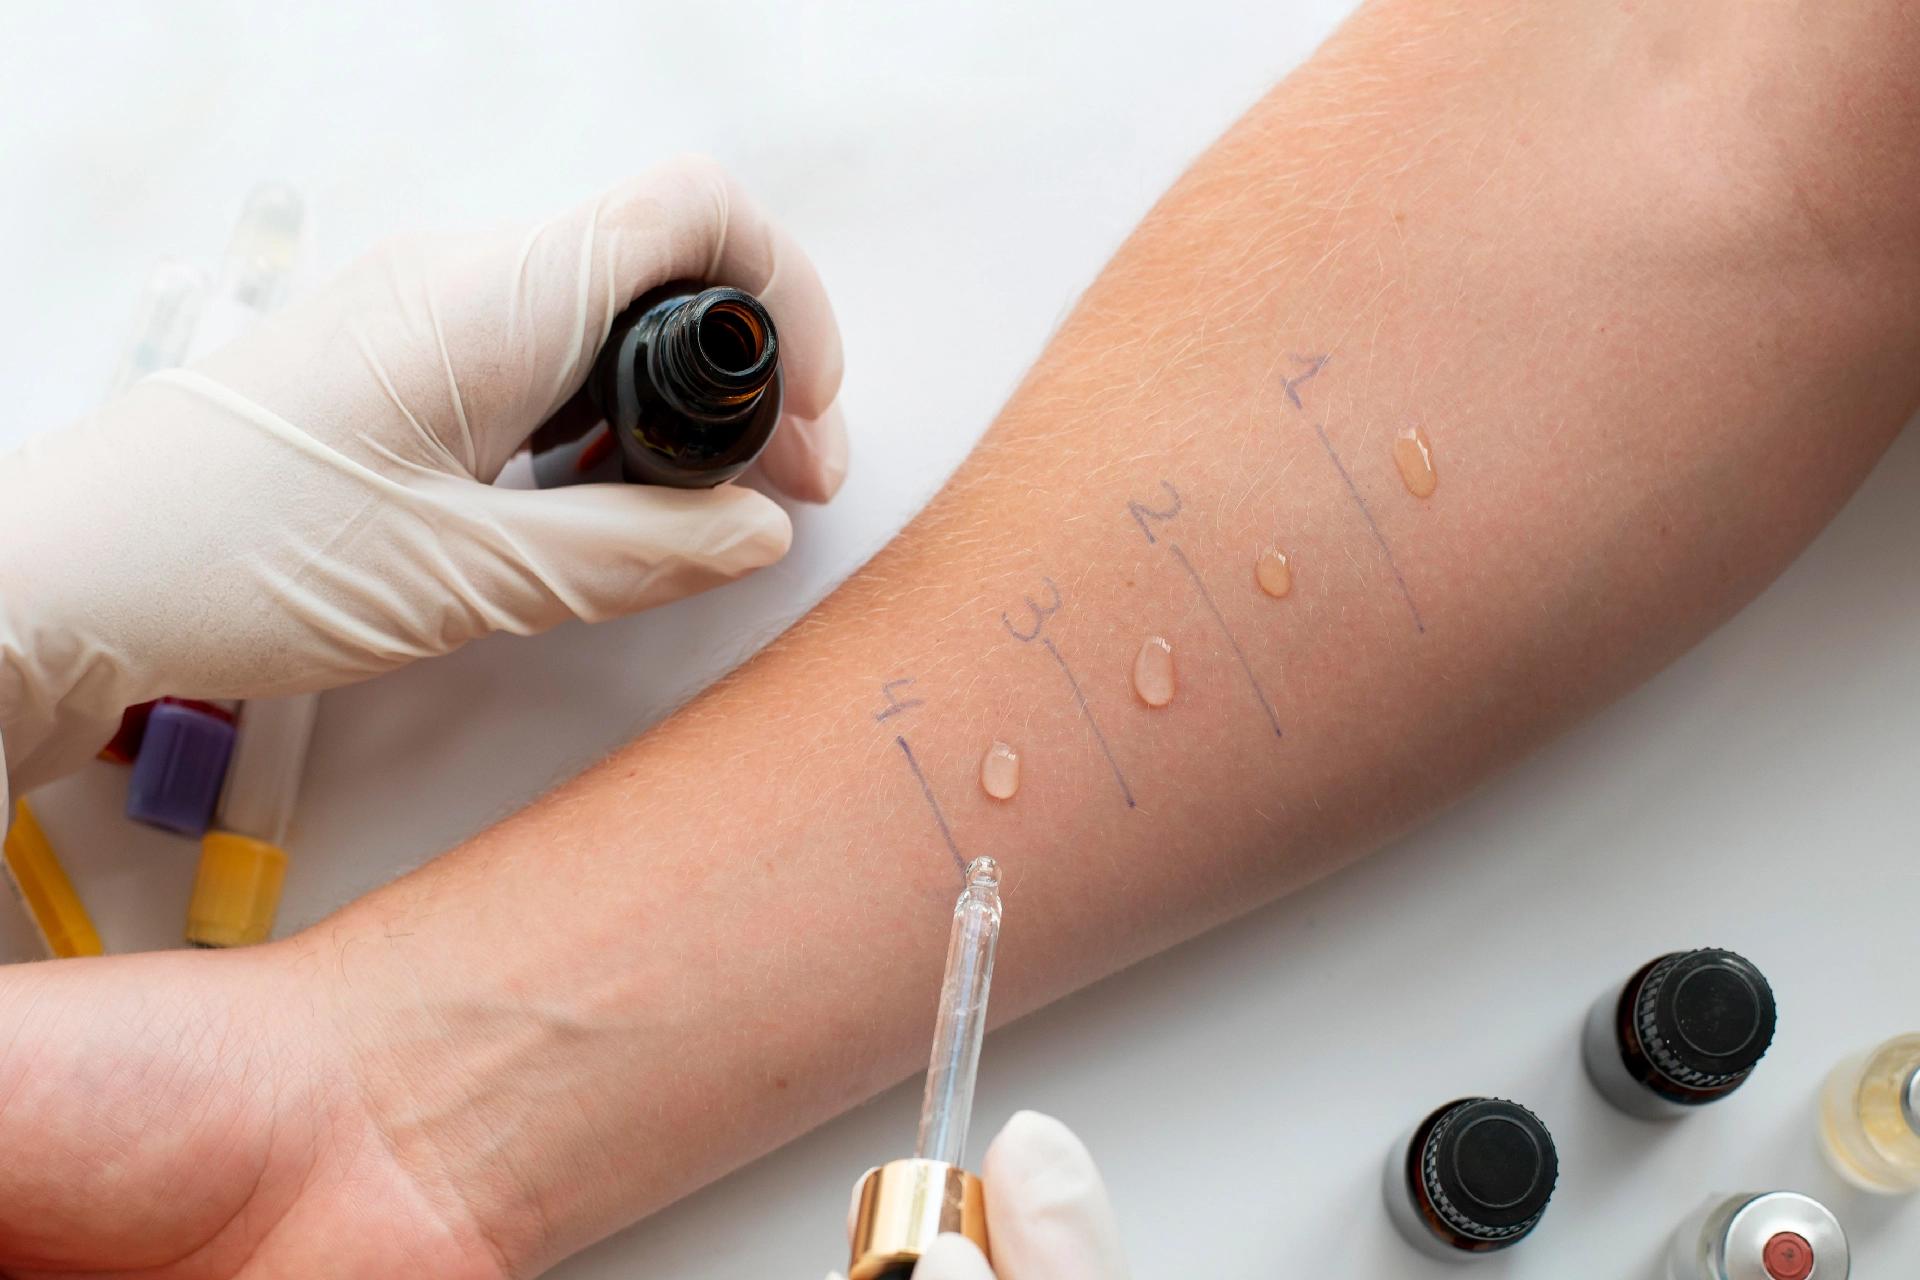 Does Allergy Testing Pose Any Threatening Risks? Here's What You Need to Know